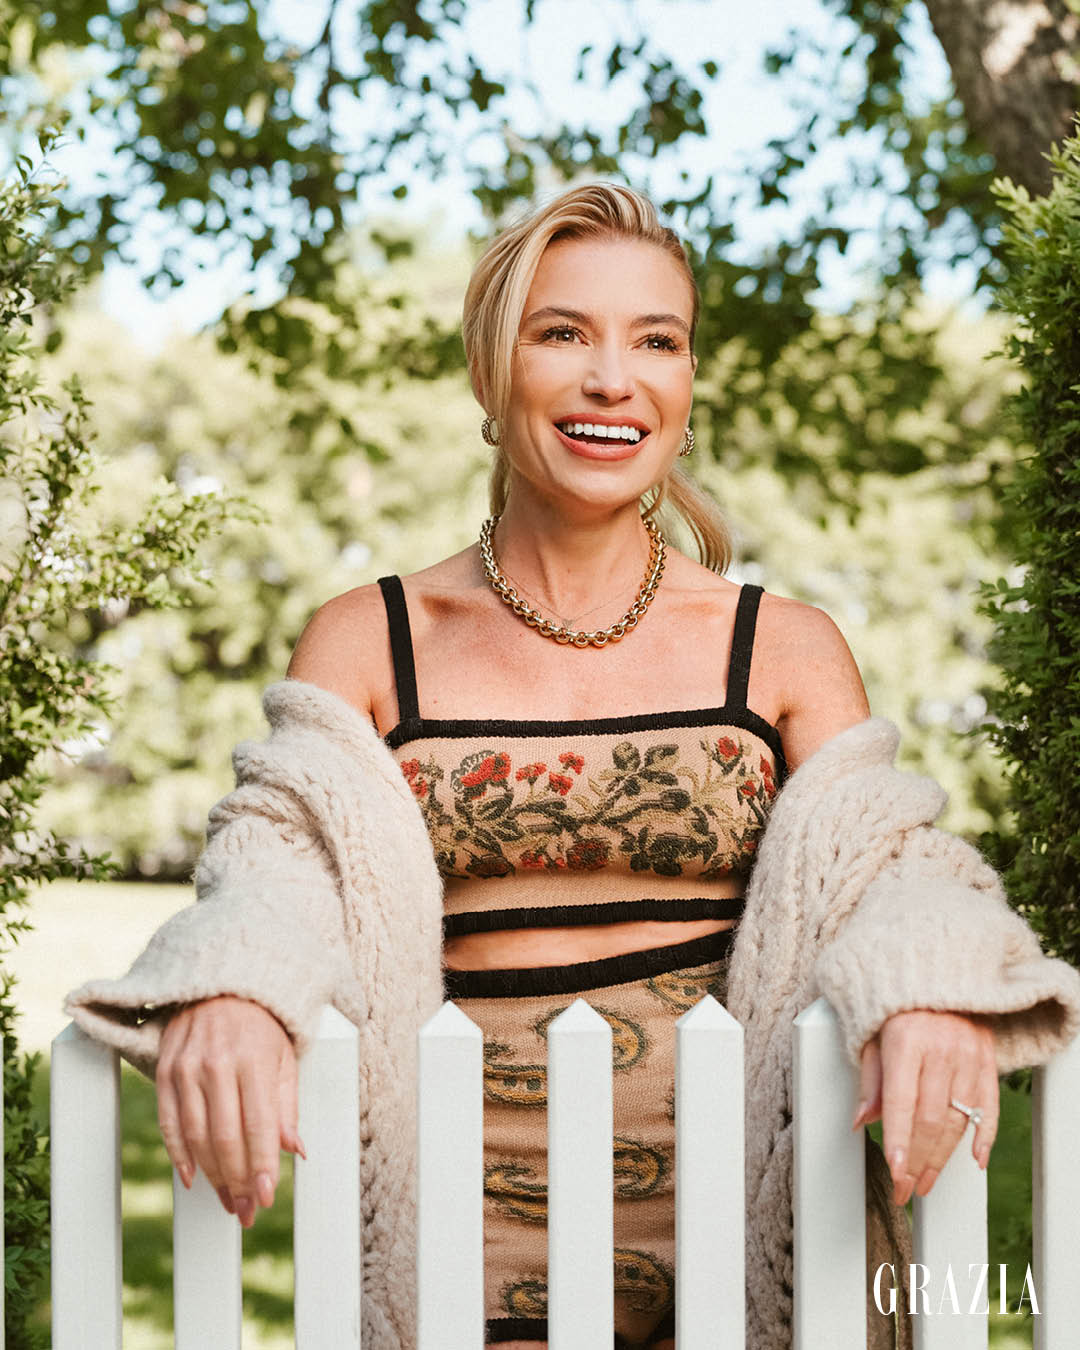 The truth behind Tracy Anderson's star-studded fitness empire